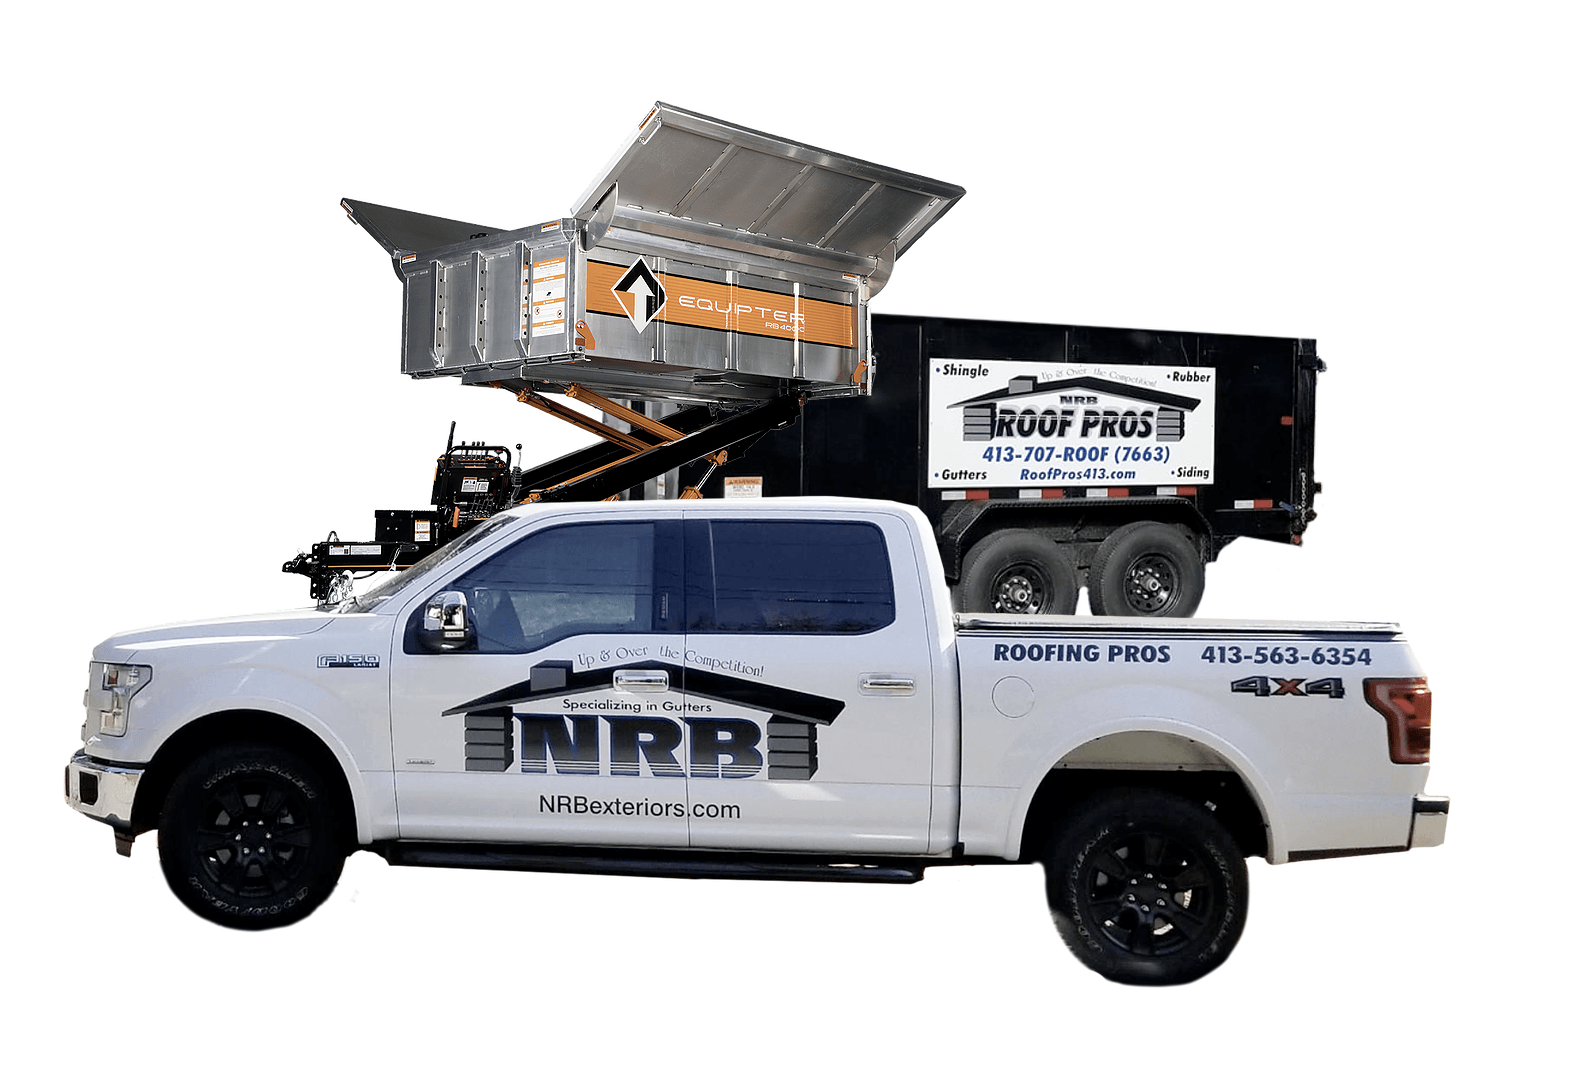 Roof Pros 413 Roofing Contractors Serving Sunderland, MA and Surrounding Towns